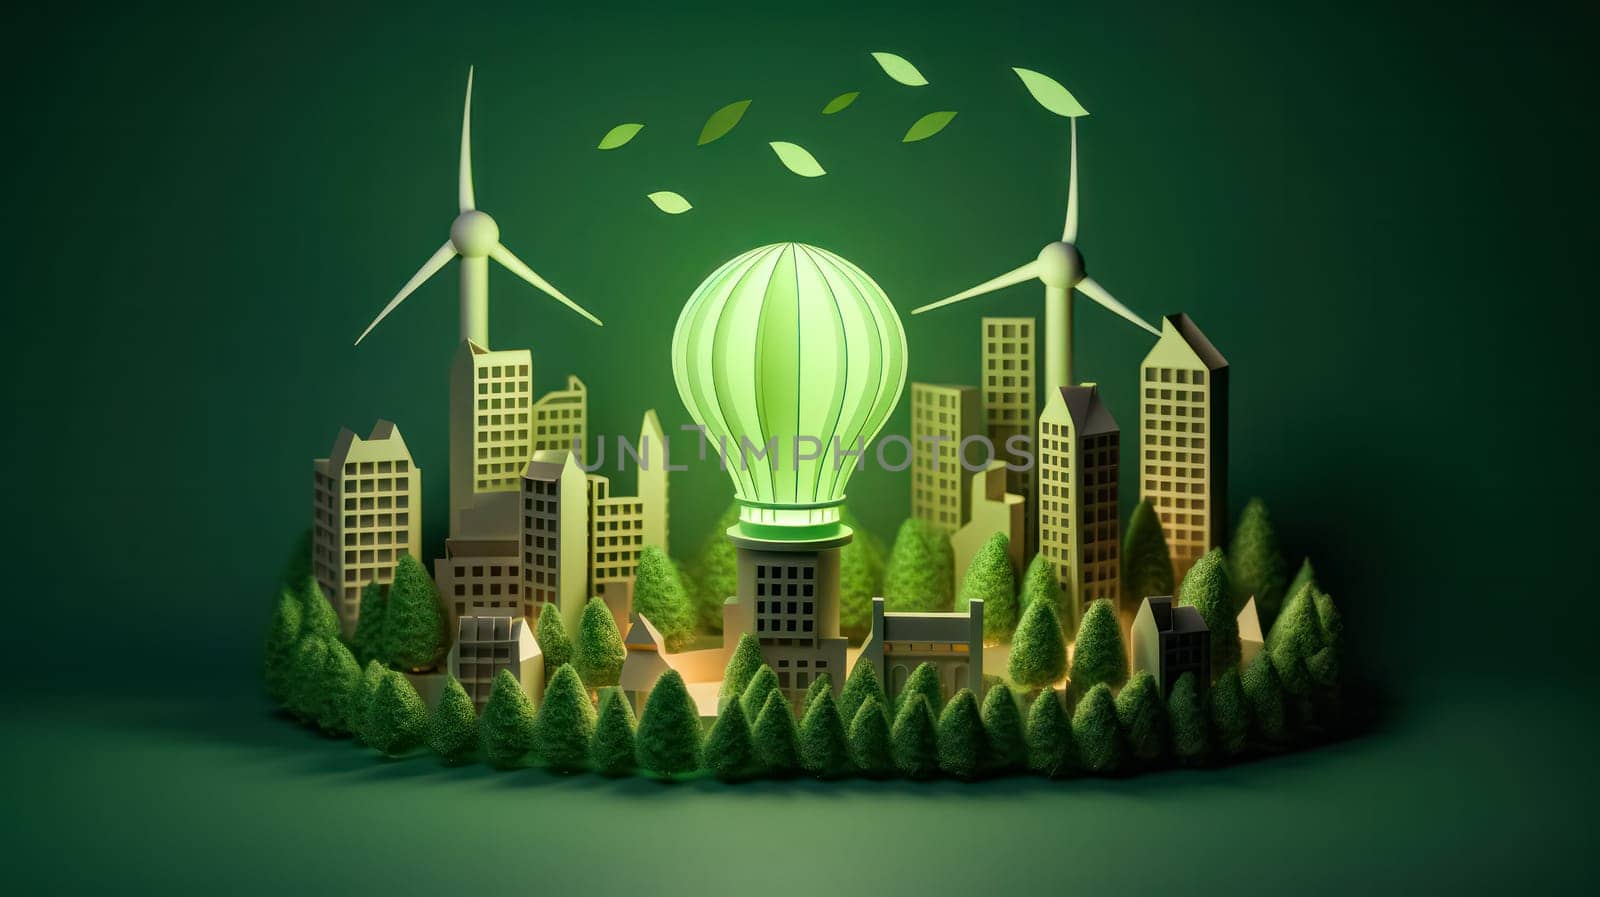 Green eco city with light bulb on white background save energy and nature. Environmental and ecology concept, sustainable development.illustration.